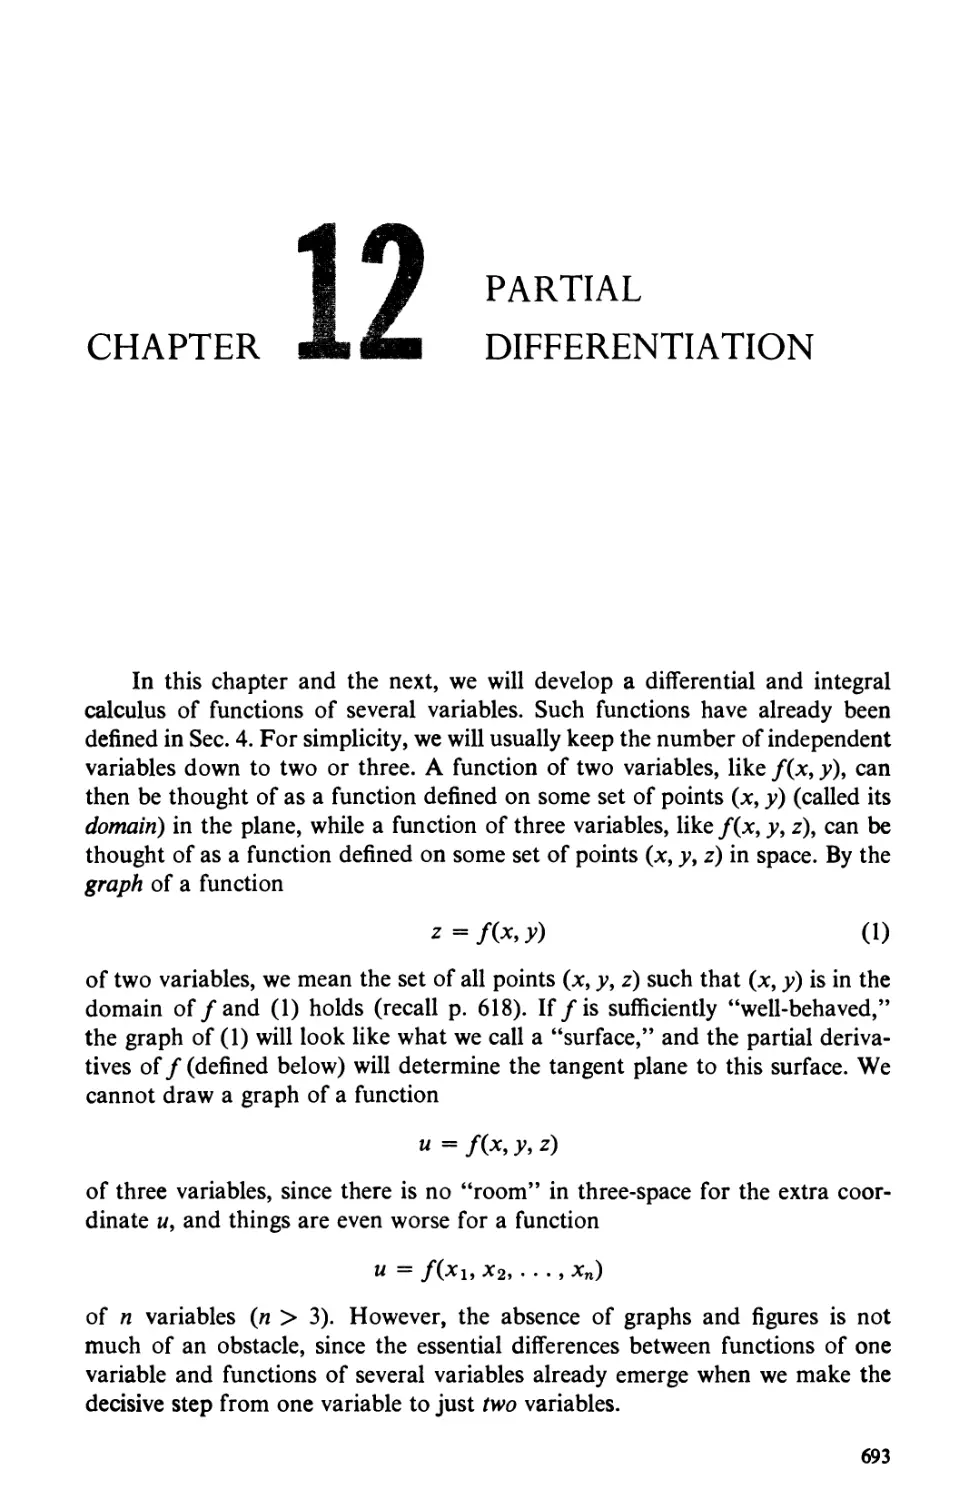 CHAPTER 12 PARTIAL DIFFERENTIATION